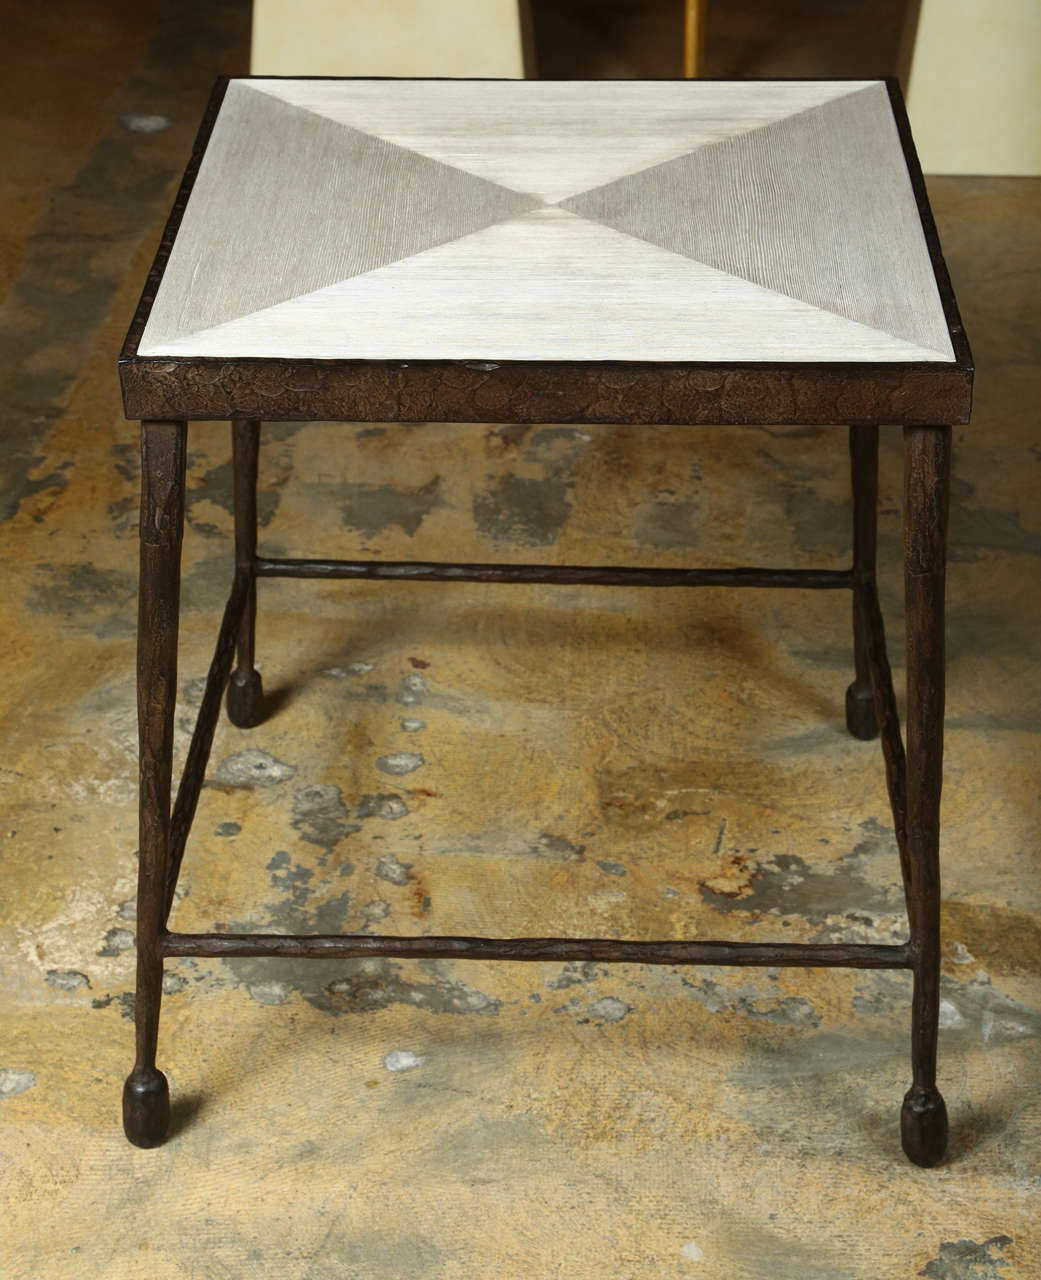 Modern, rustic, organic modern iron and douglas fir inset side table. By order. Also available to order with other top inset material.